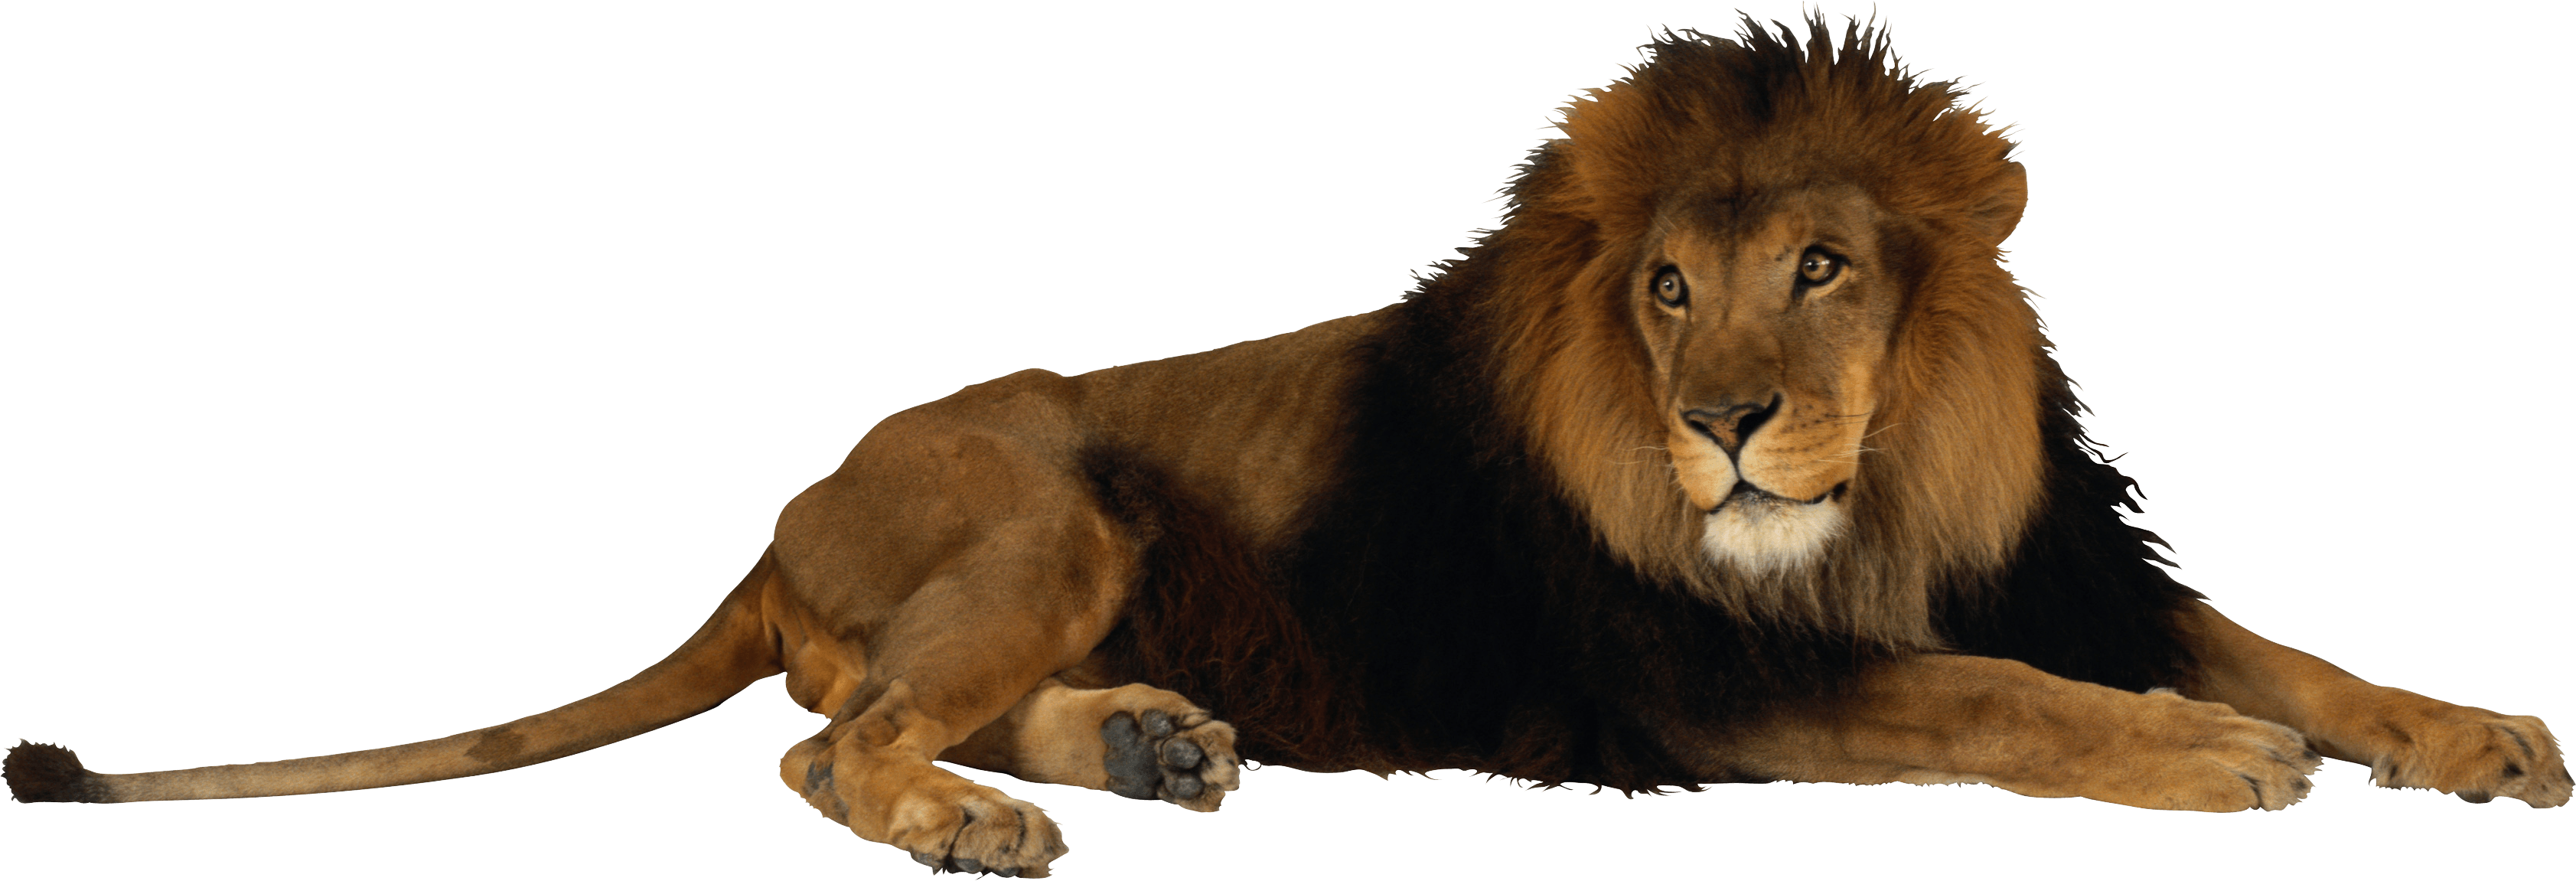 Lion PNG High-Quality Image